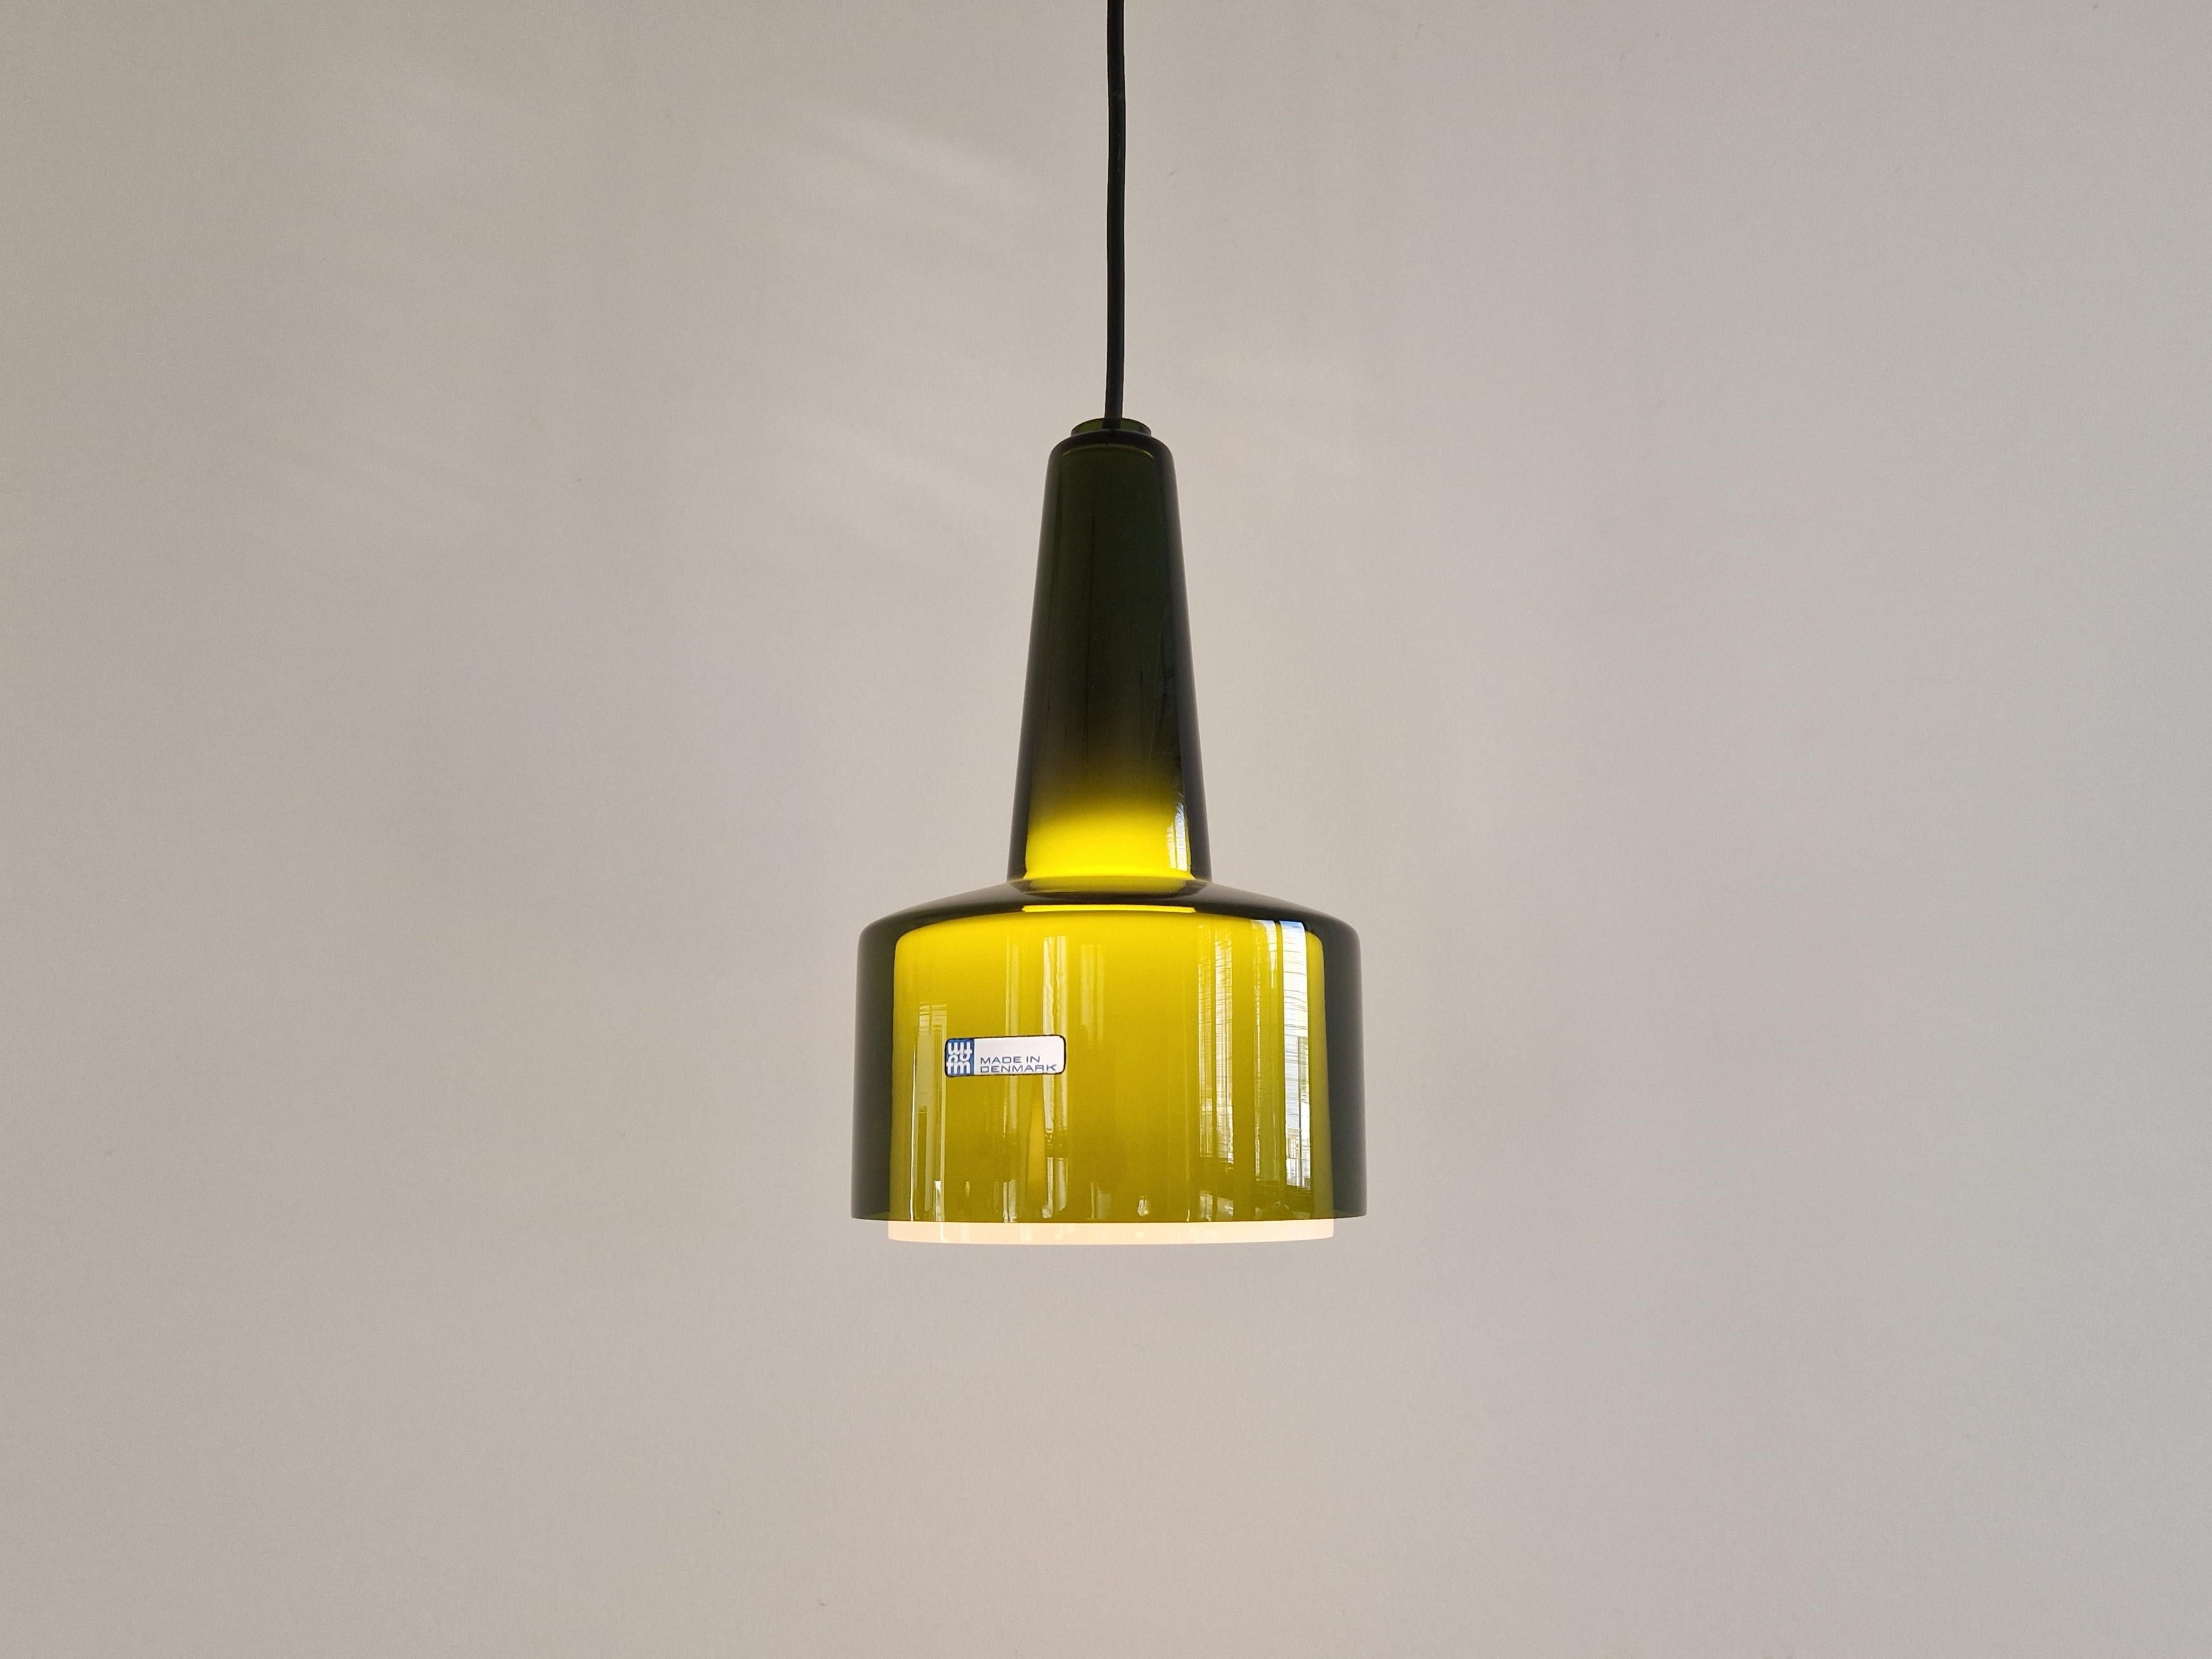 This beautiful and elegant pendant lamp, model 'Capri' was designed and made for Fog & Mørup in Denmark in the 1960's. It has a clear olive green glass exterior shade and a smaller opaline white interior shade that just comes out underneath the